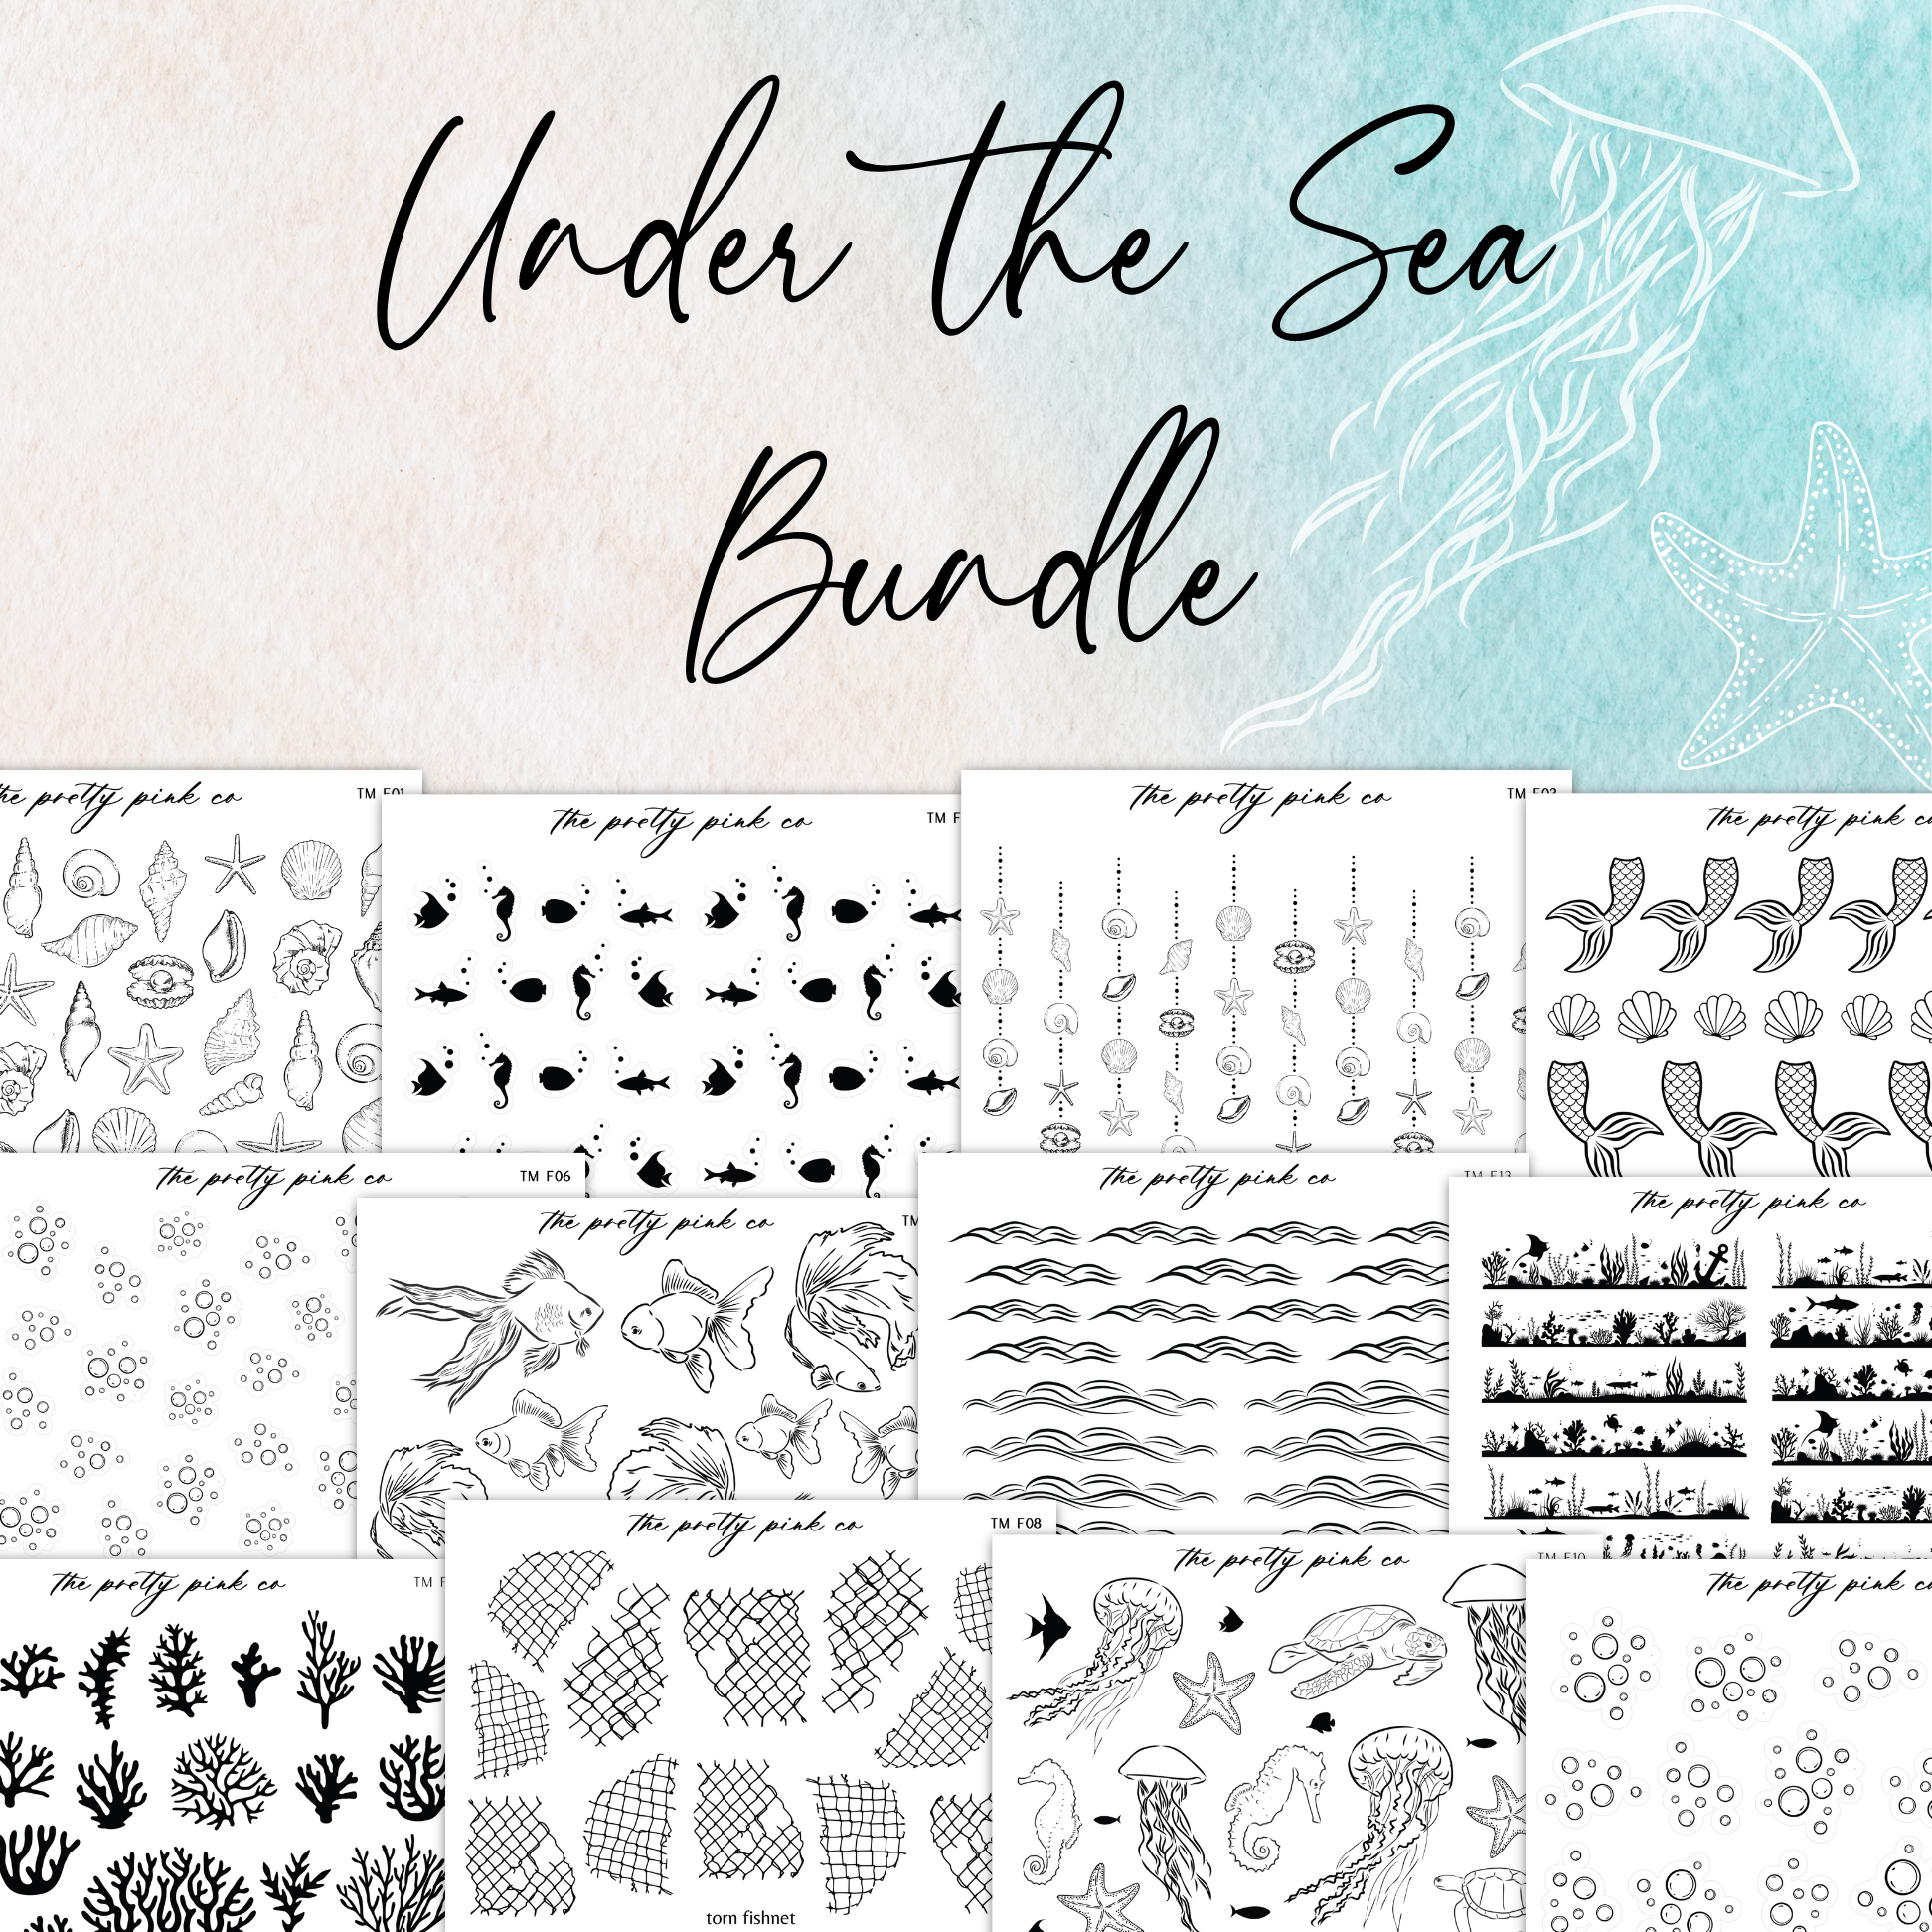 the under the sea bundle is shown in black and white